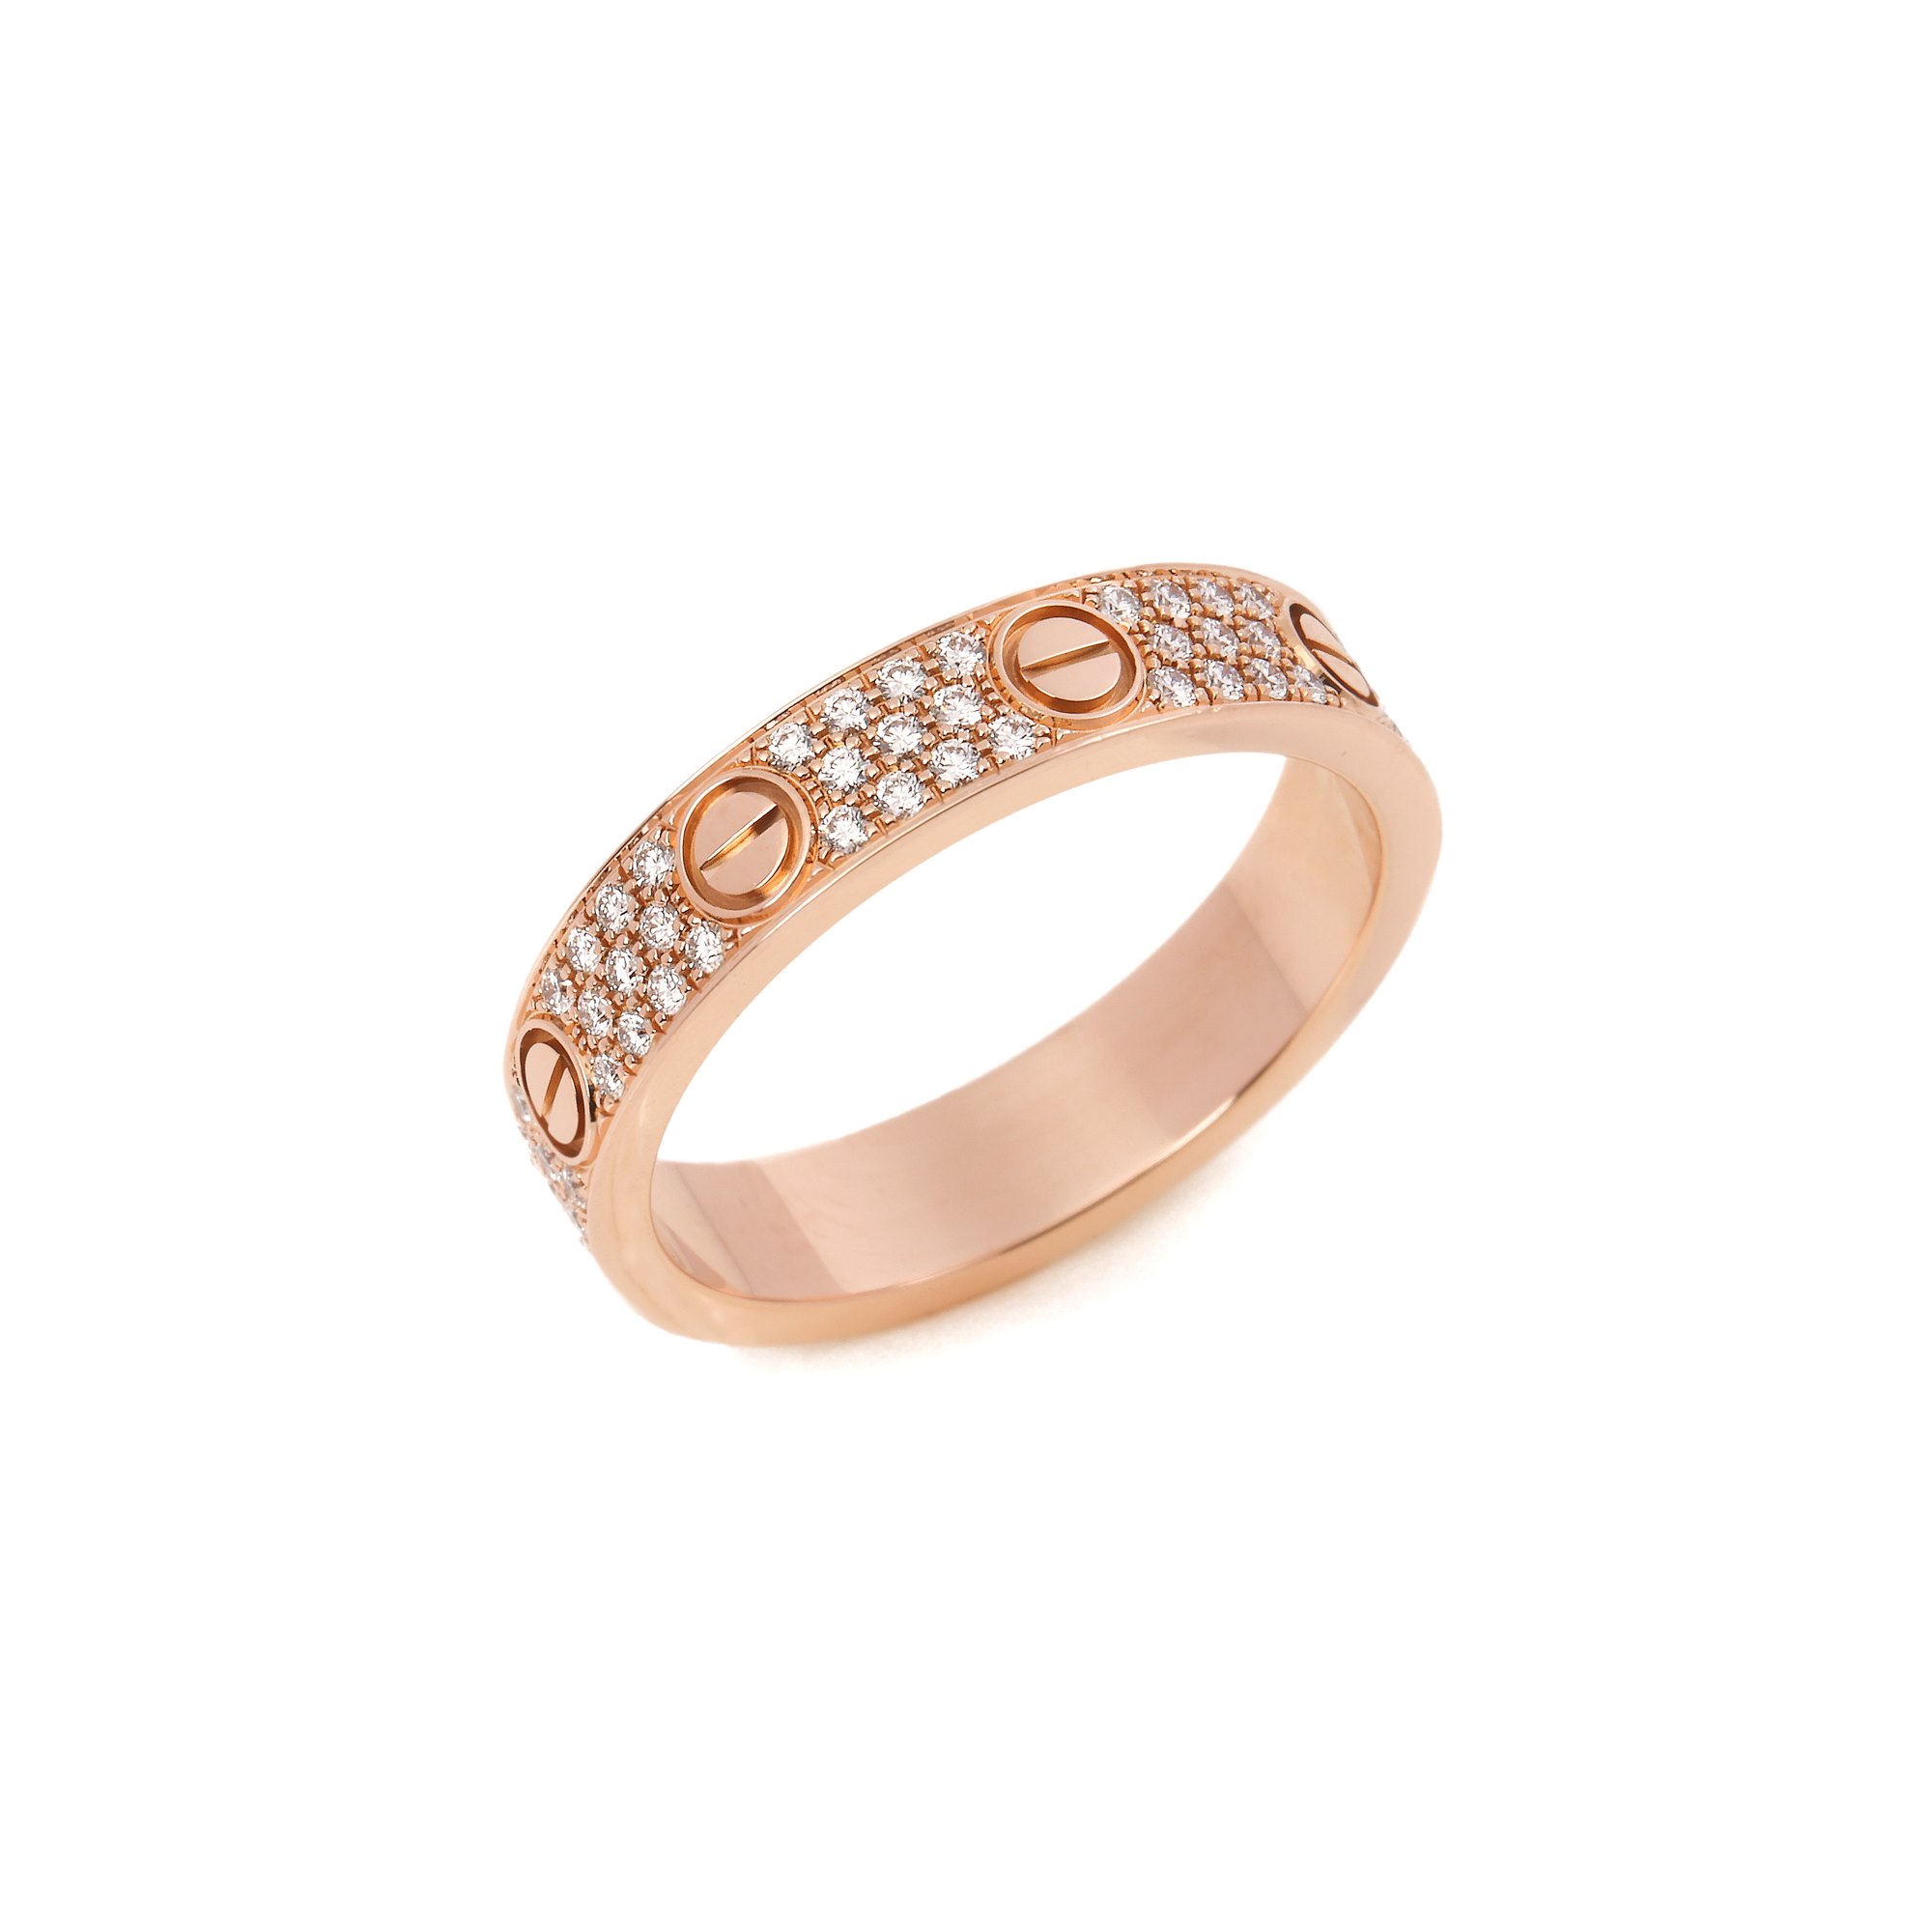 Cartier Pave Love ring